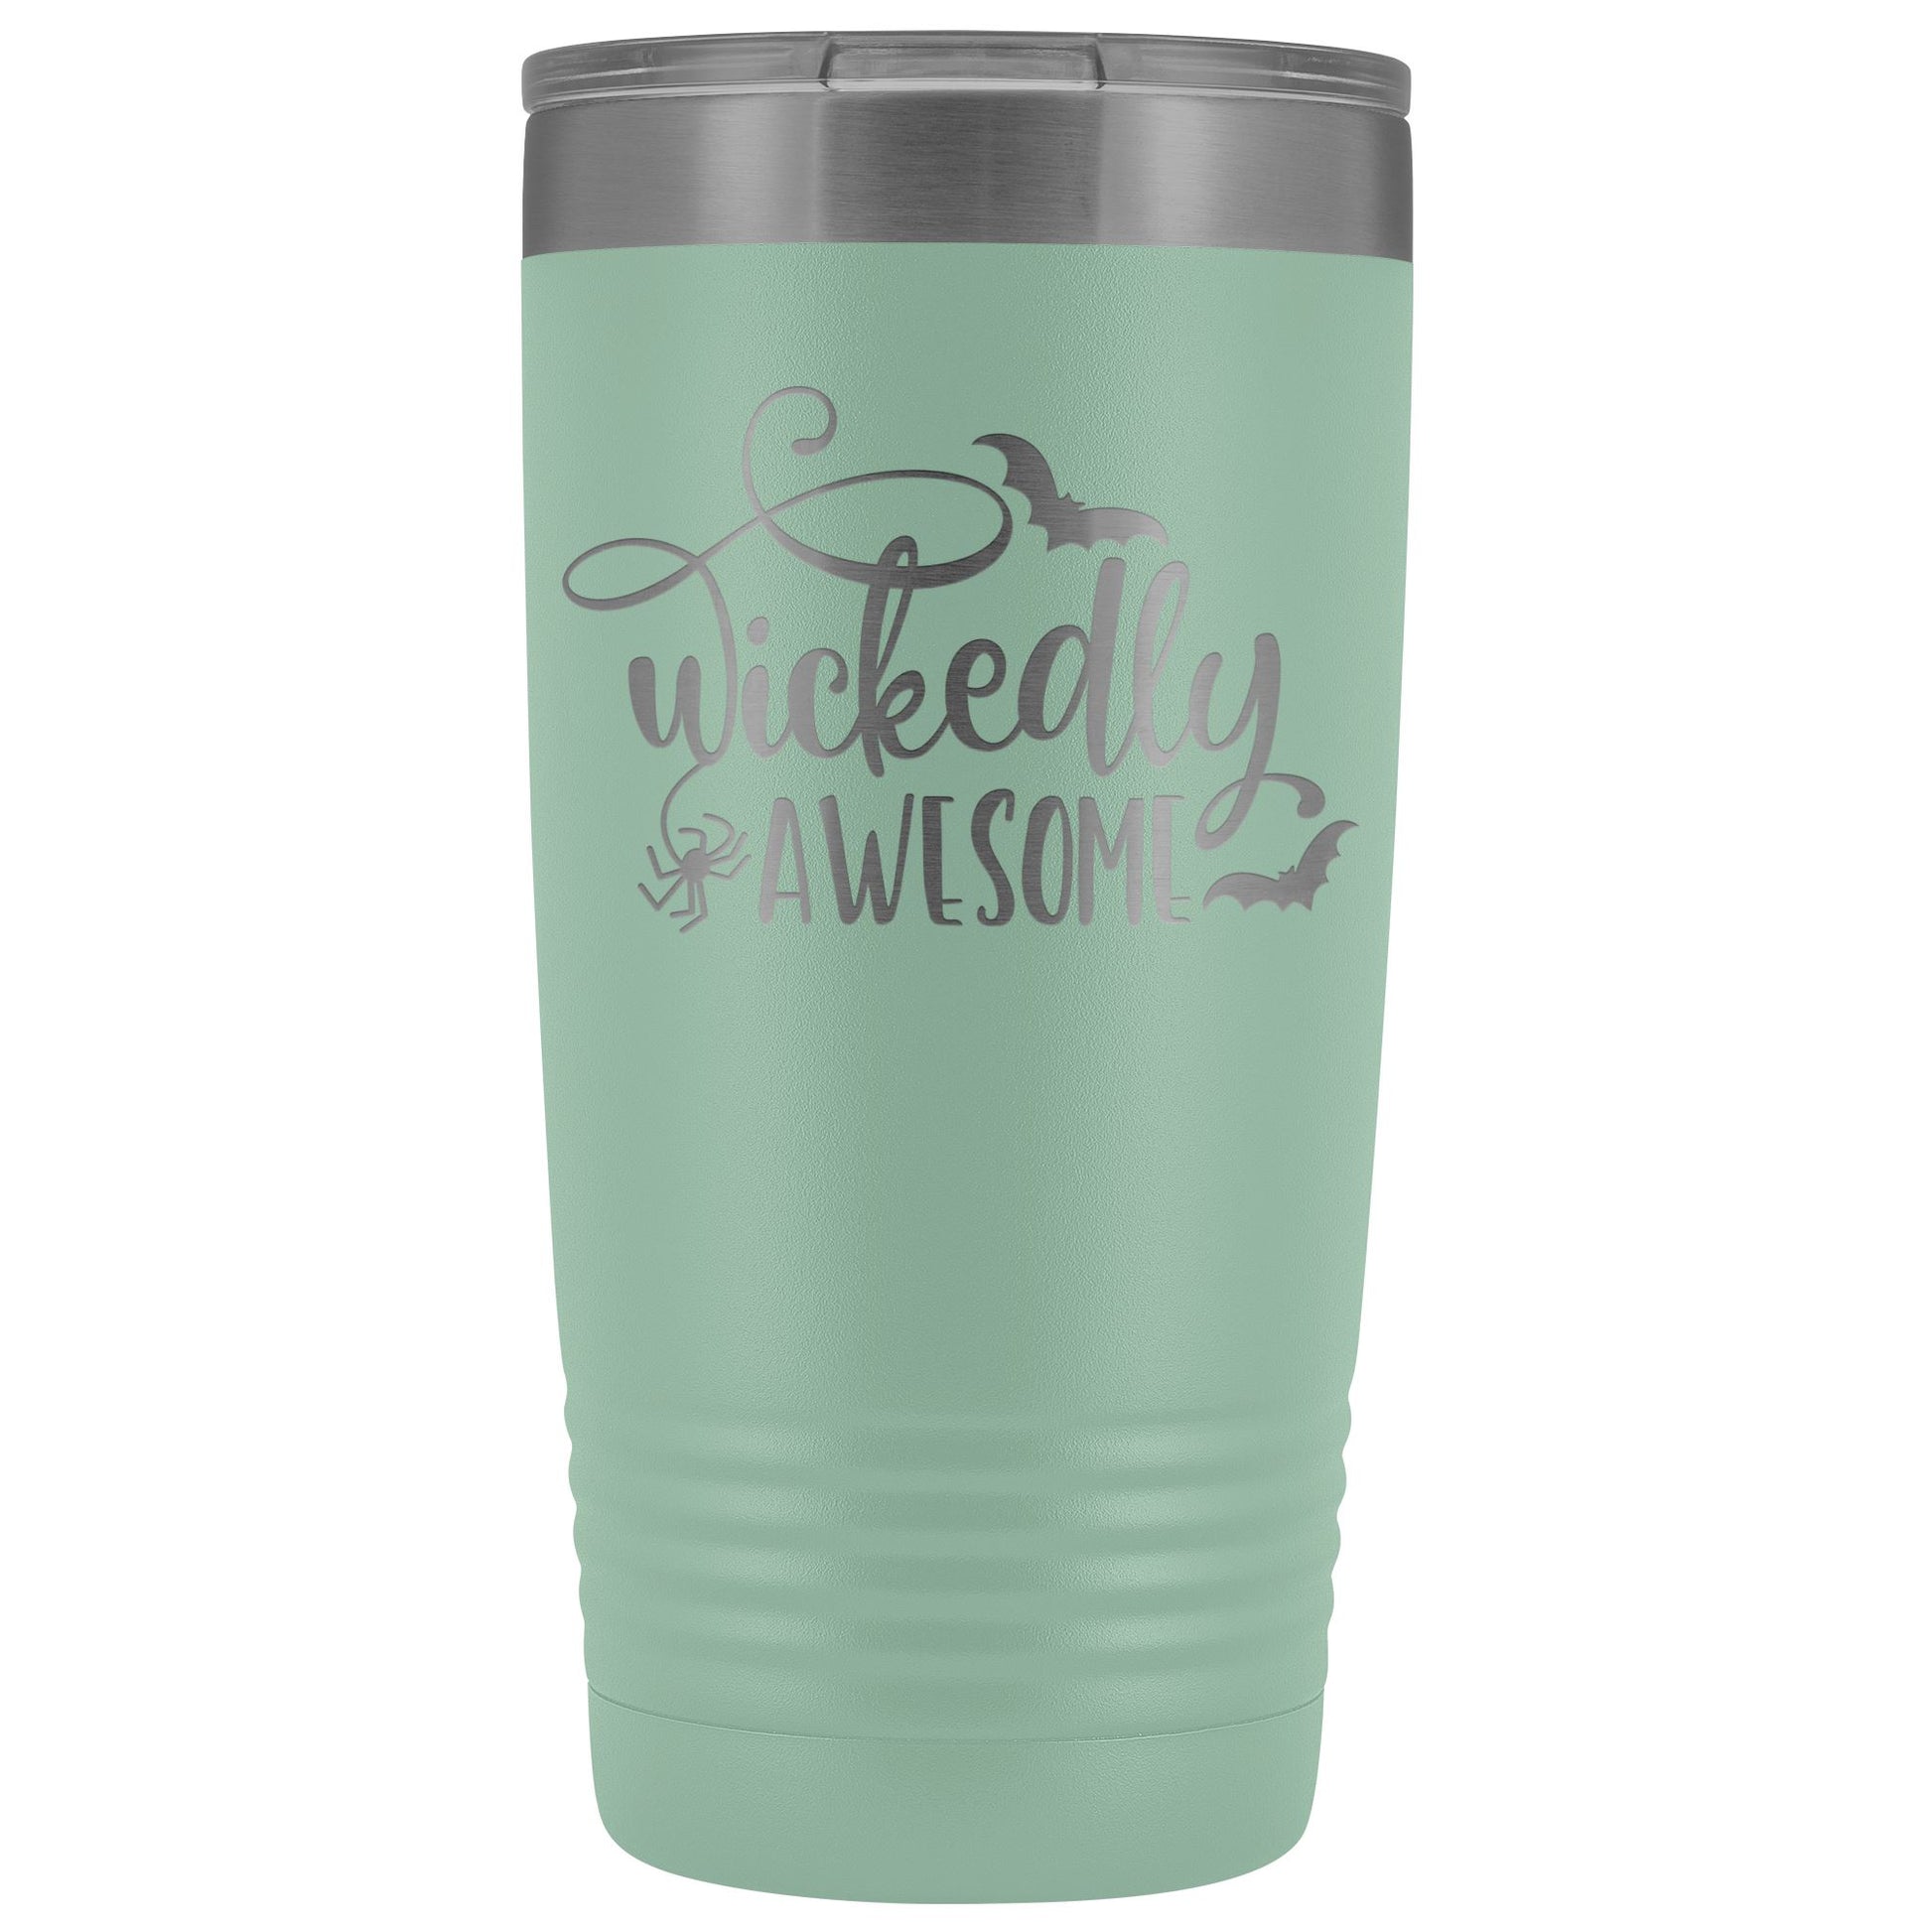 Wickedly Awesome 20oz. Halloween Tumbler